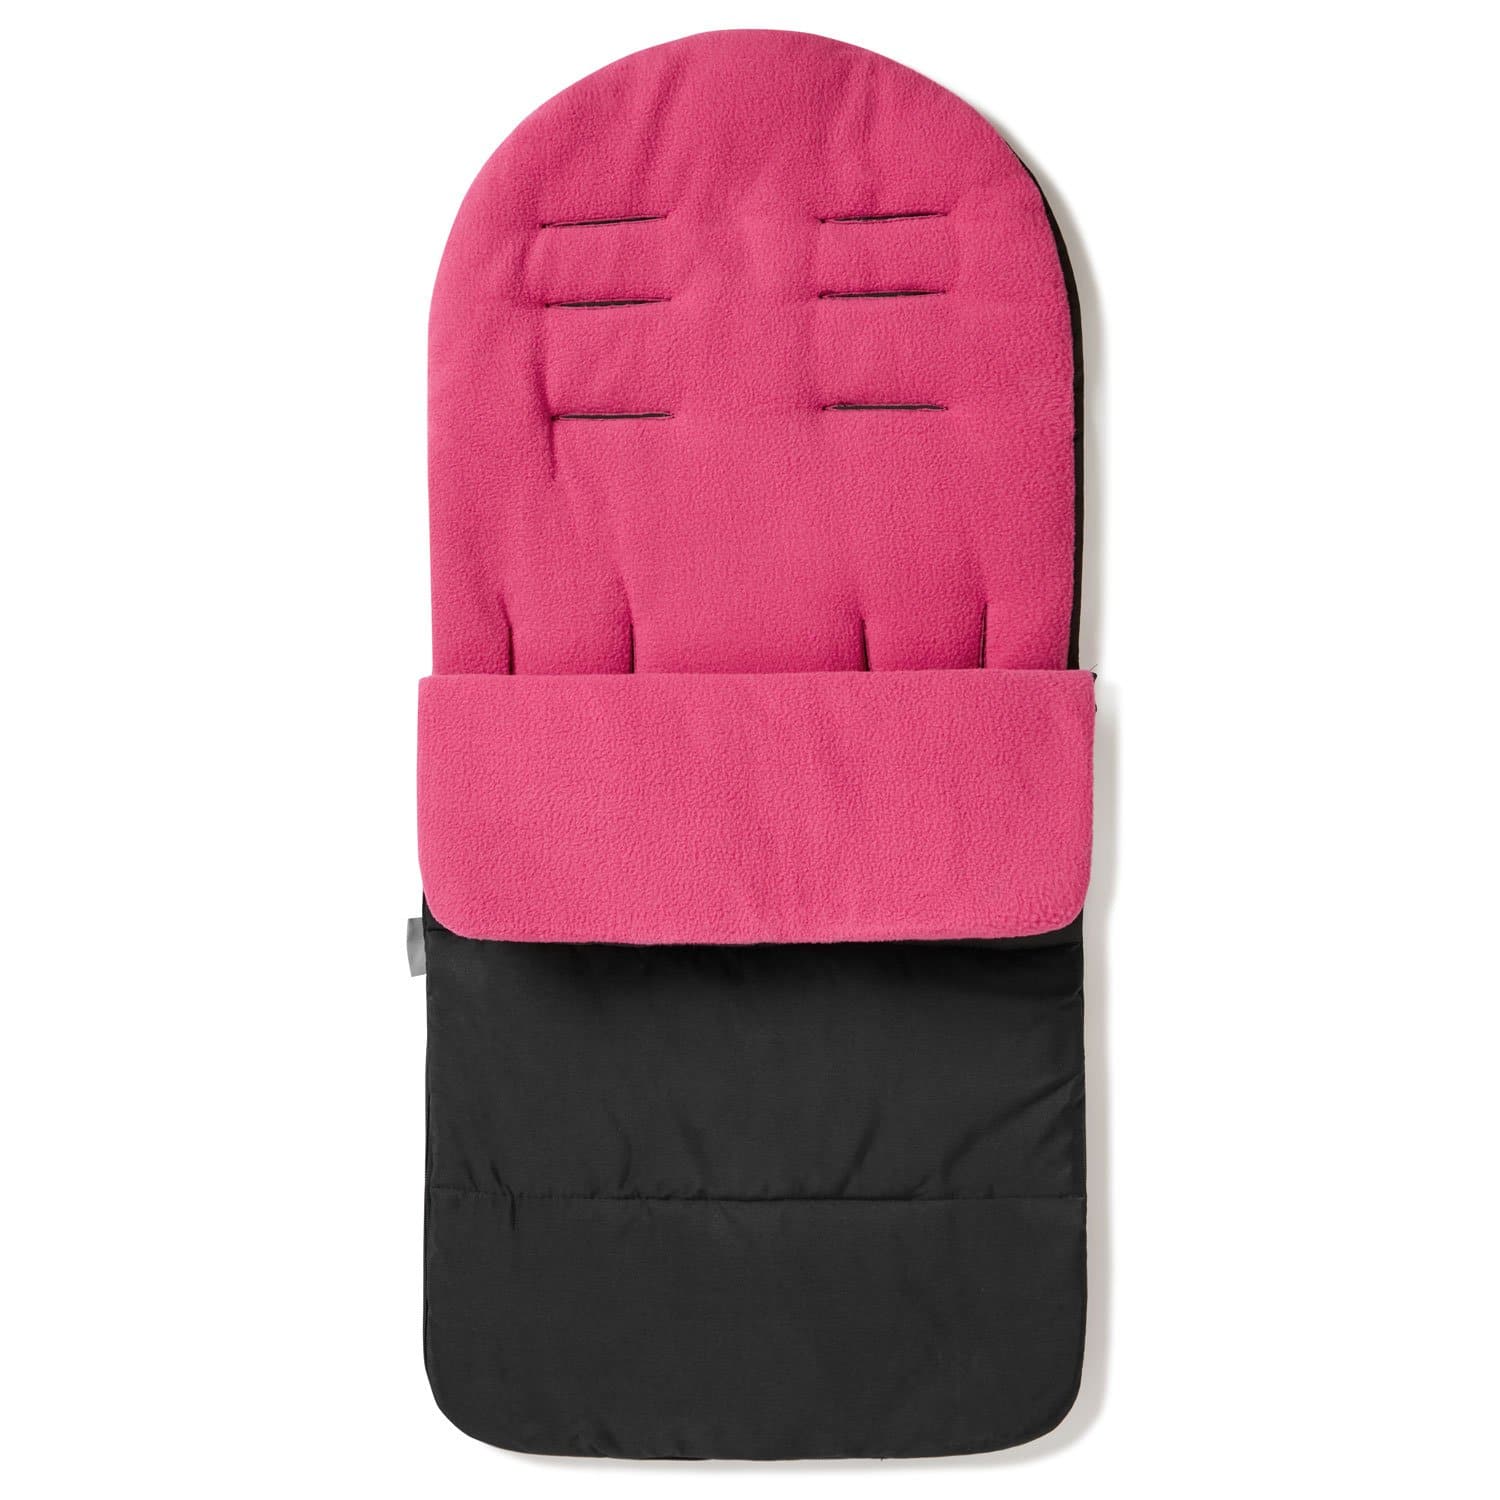 Premium Footmuff / Cosy Toes Compatible with Mutsy - Pink Rose / Fits All Models | For Your Little One